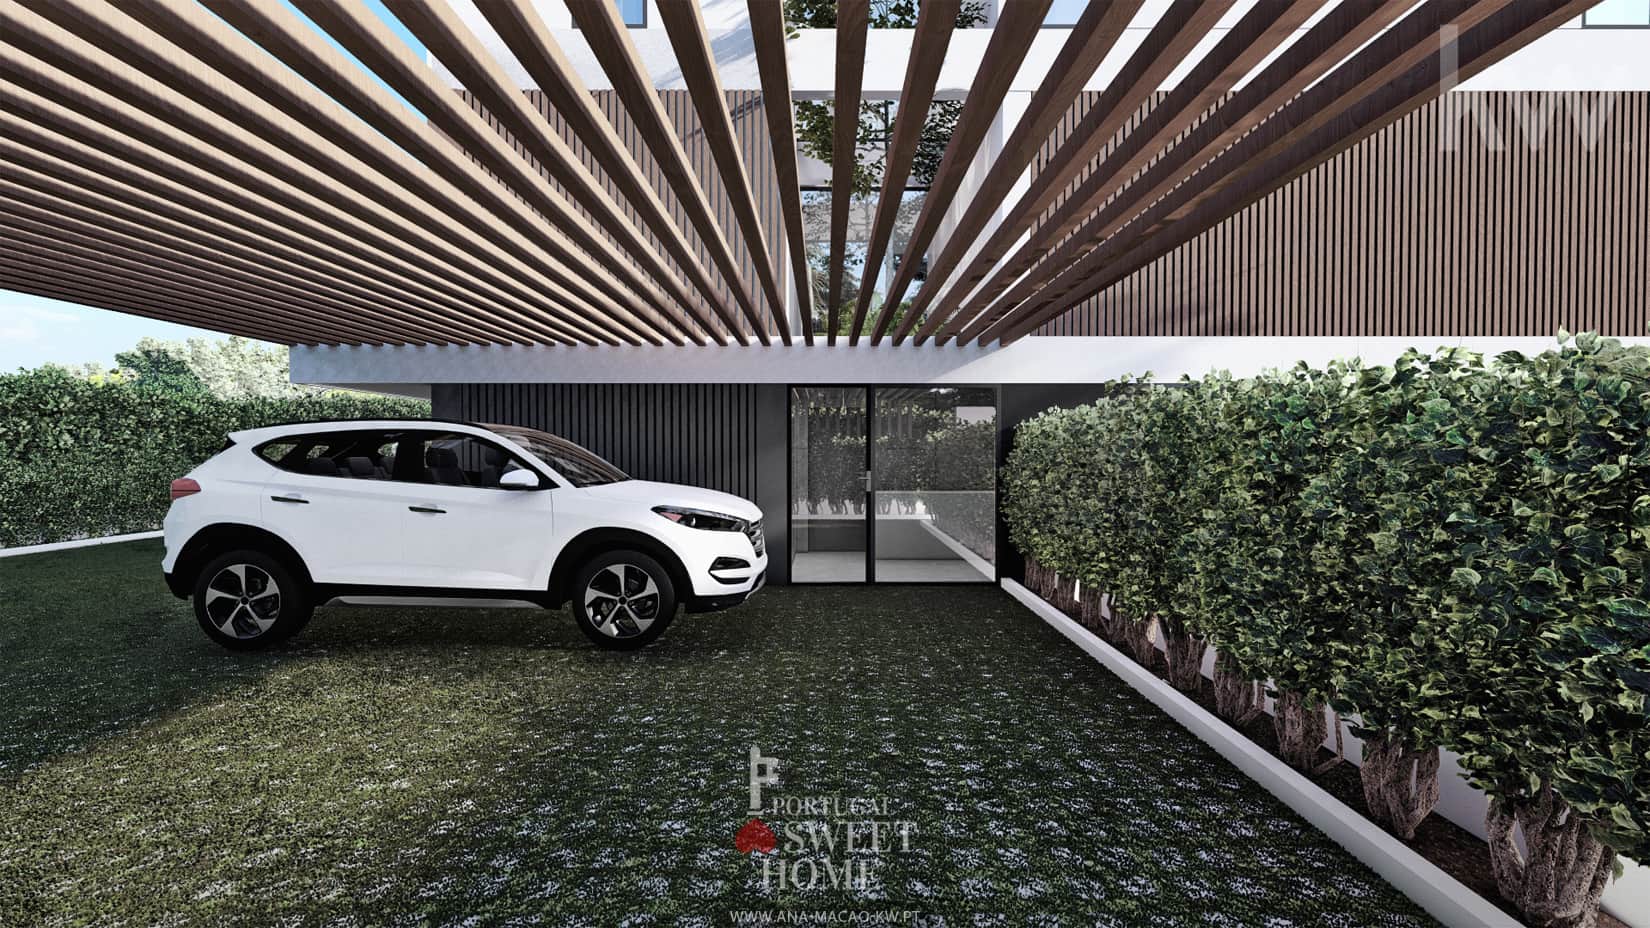 Outdoor parking area (2 cars) covered by pergola